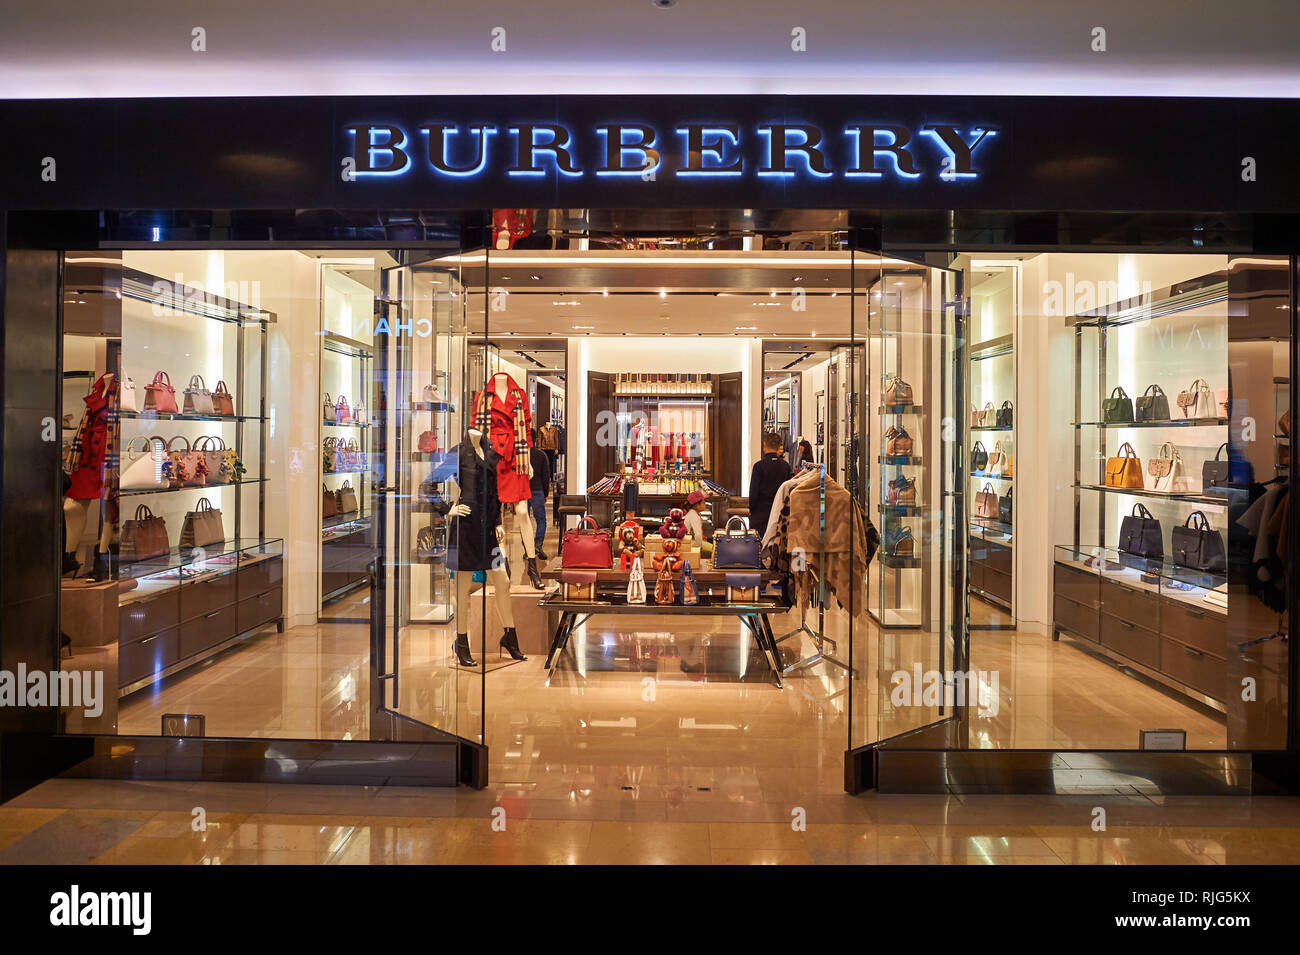 Total 81+ imagen burberry store king of prussia mall - Abzlocal.mx